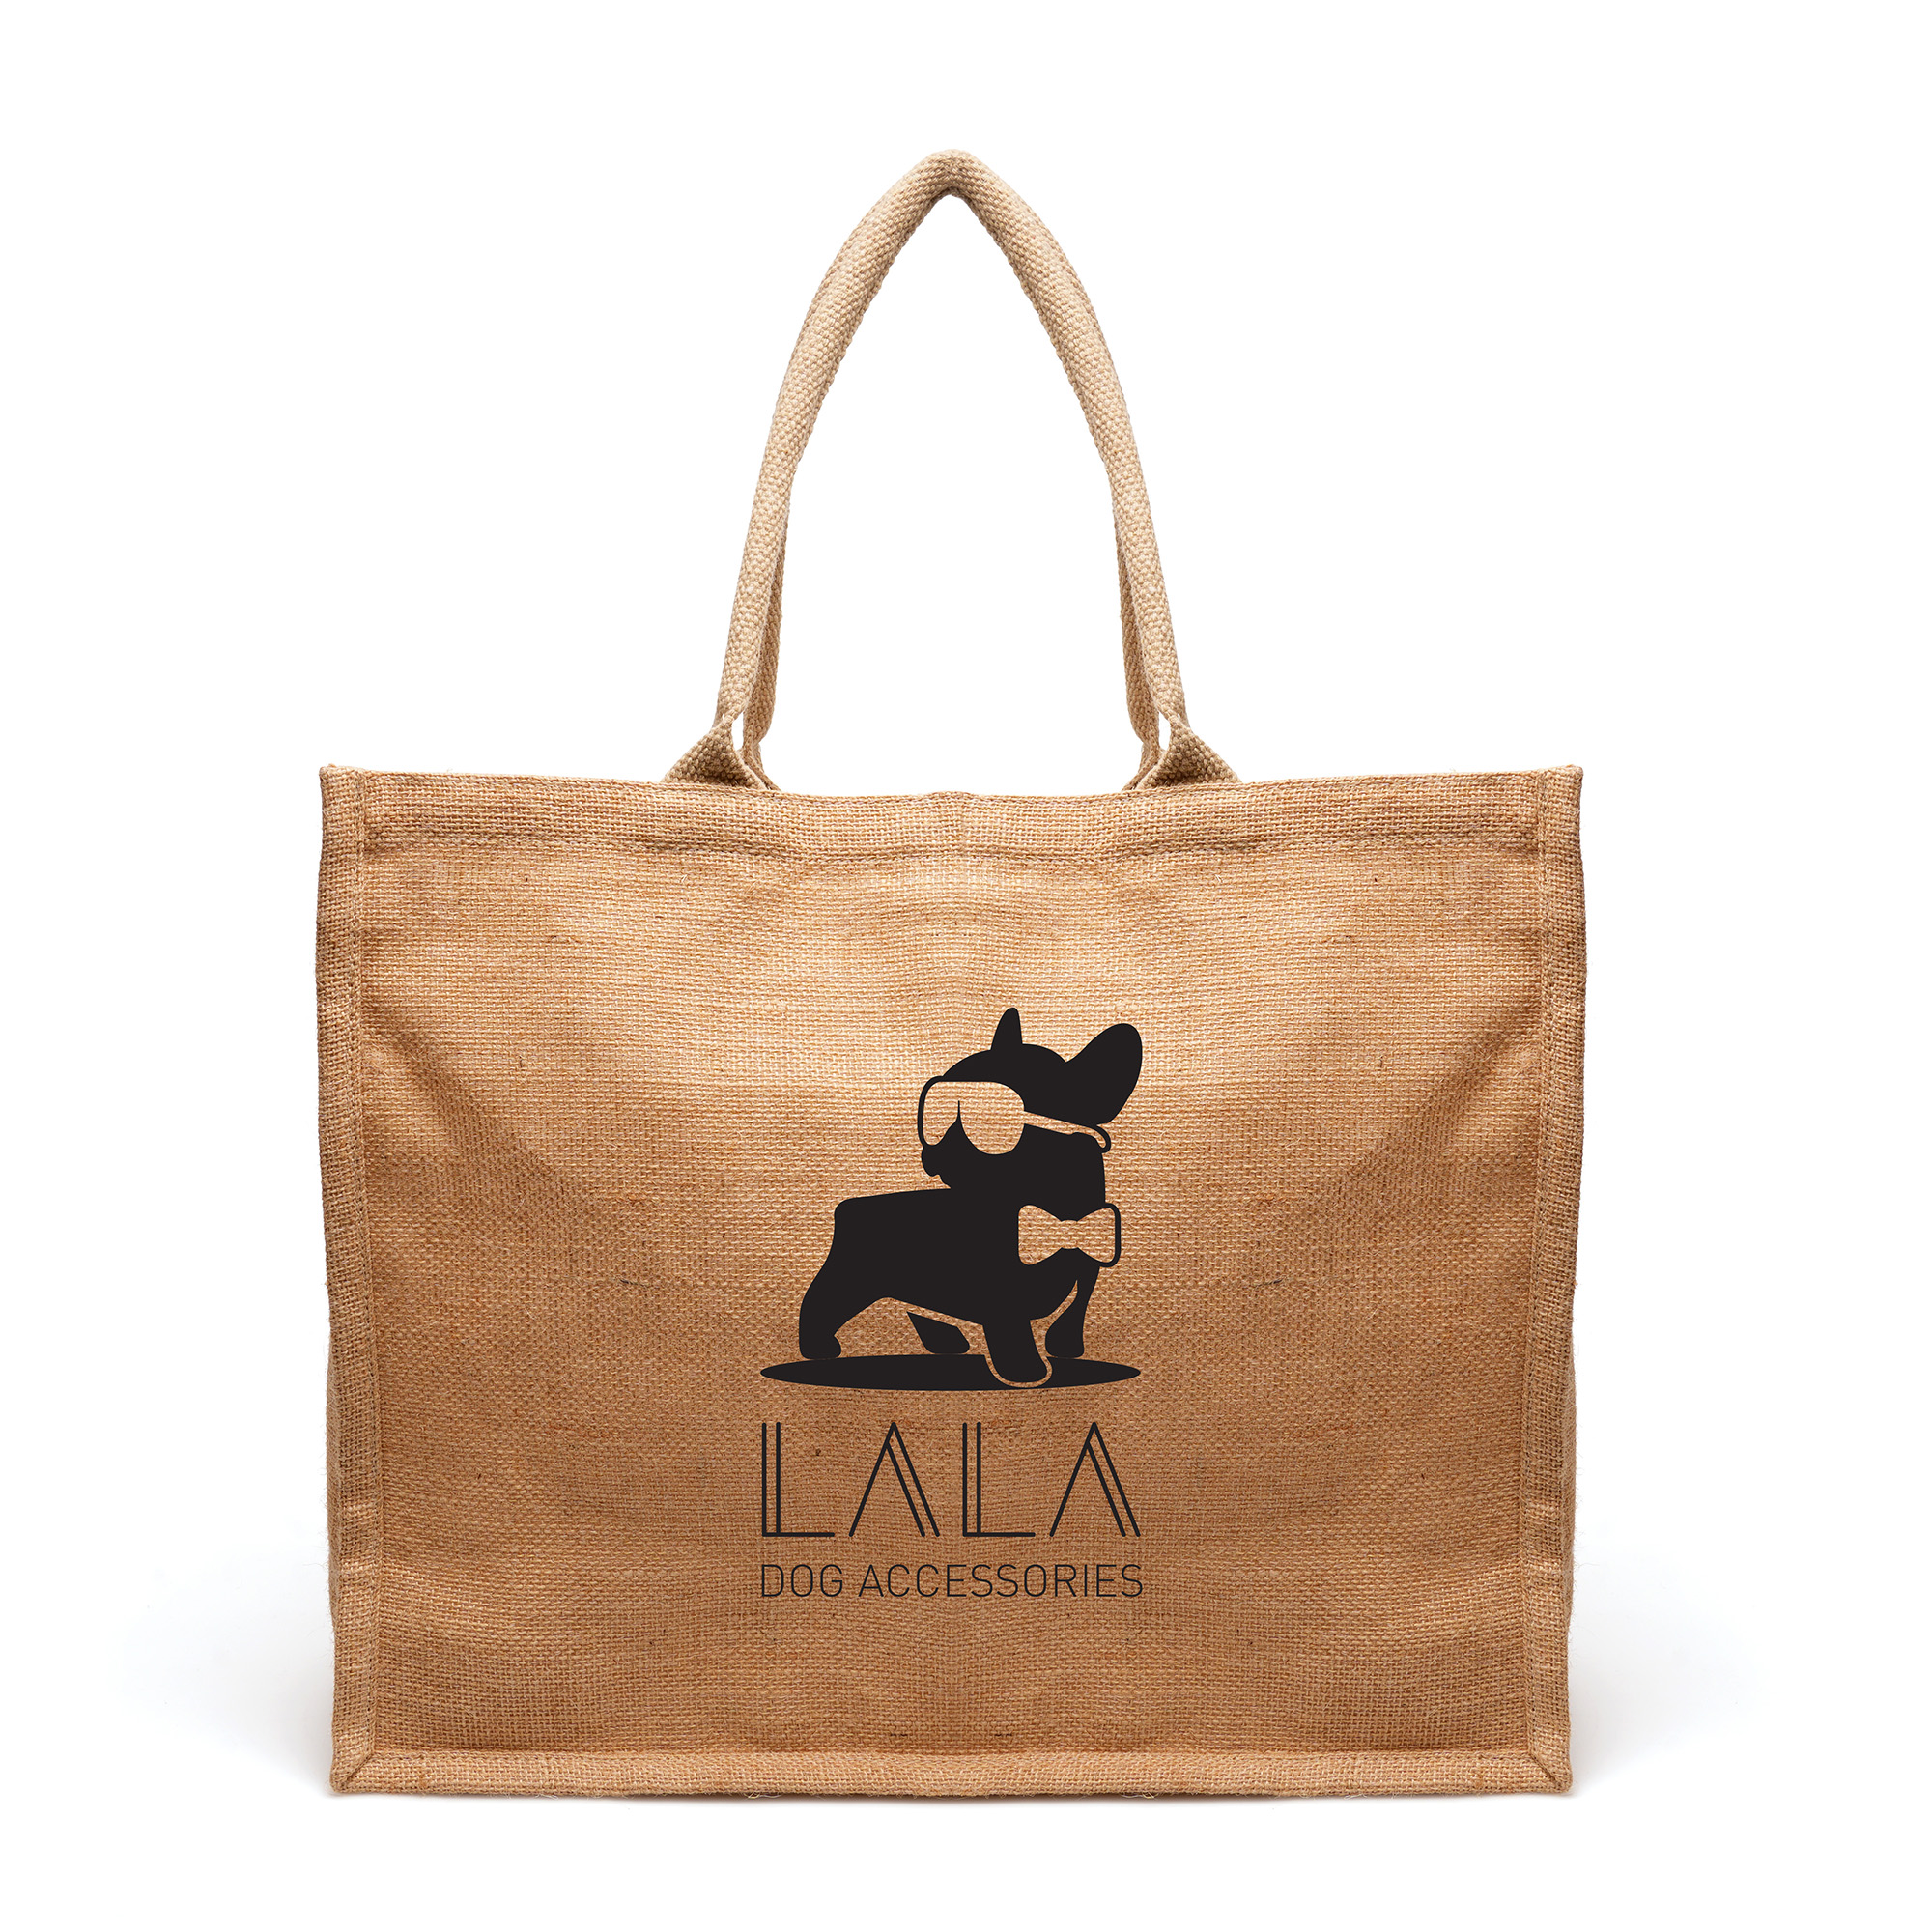 Natural jute eco-friendly shopper with padded cotton webbed handles, cotton lining and gusset.